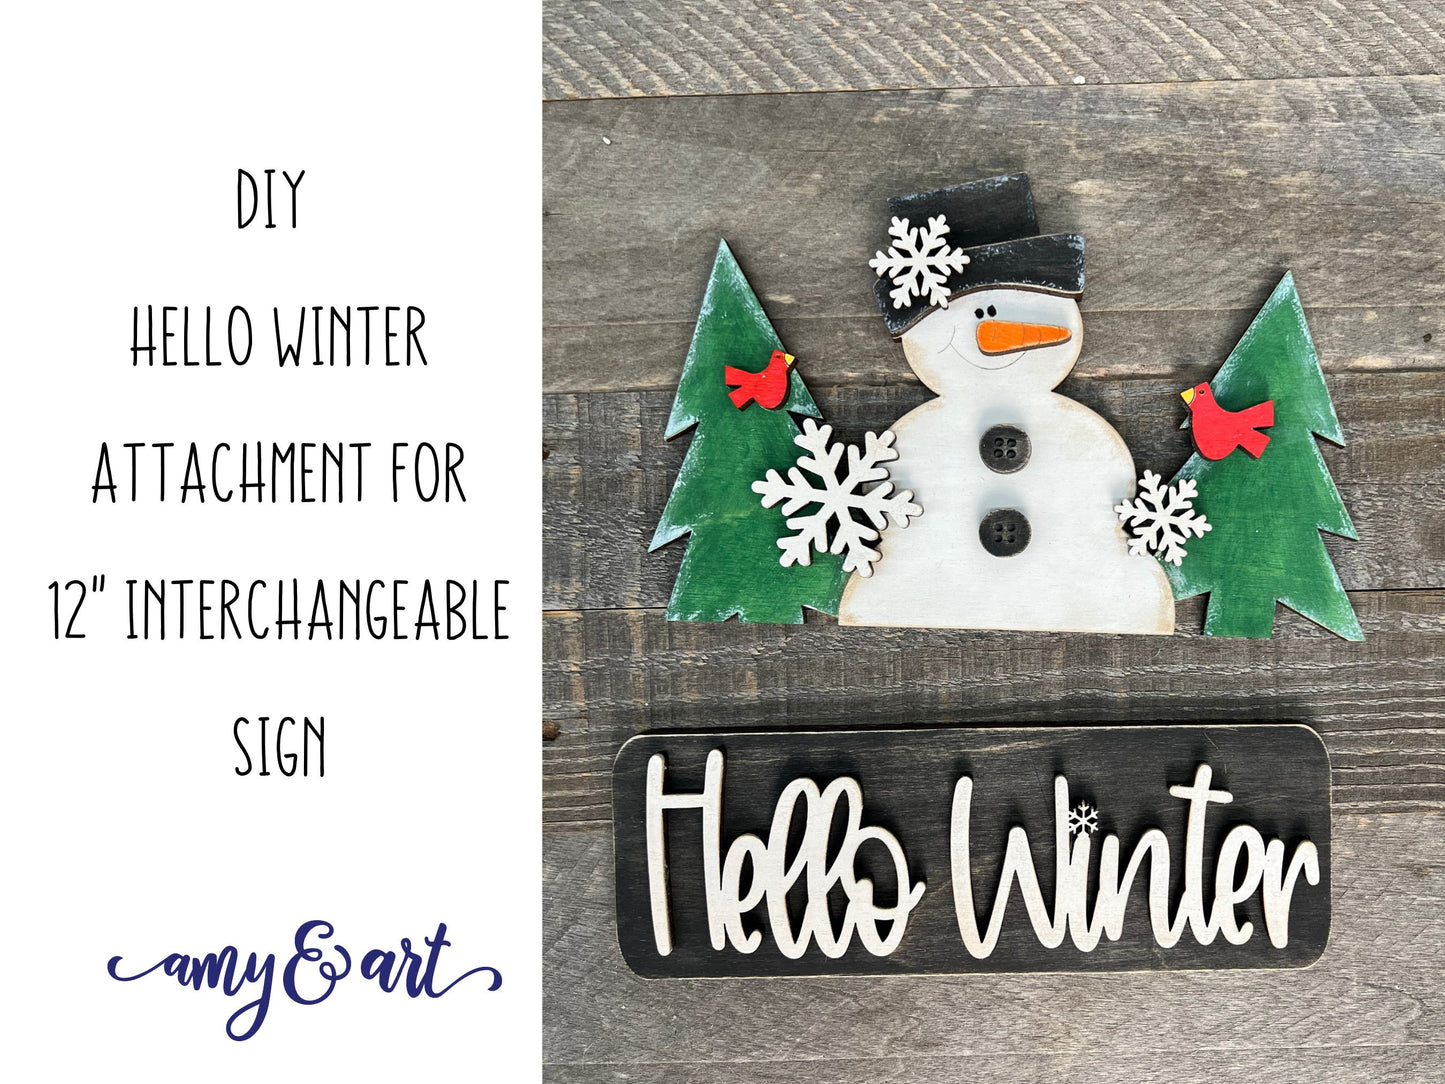 Hello Winter DIY Attachment Pieces for Interchangeable Farmhouse Style 12" Round Sign